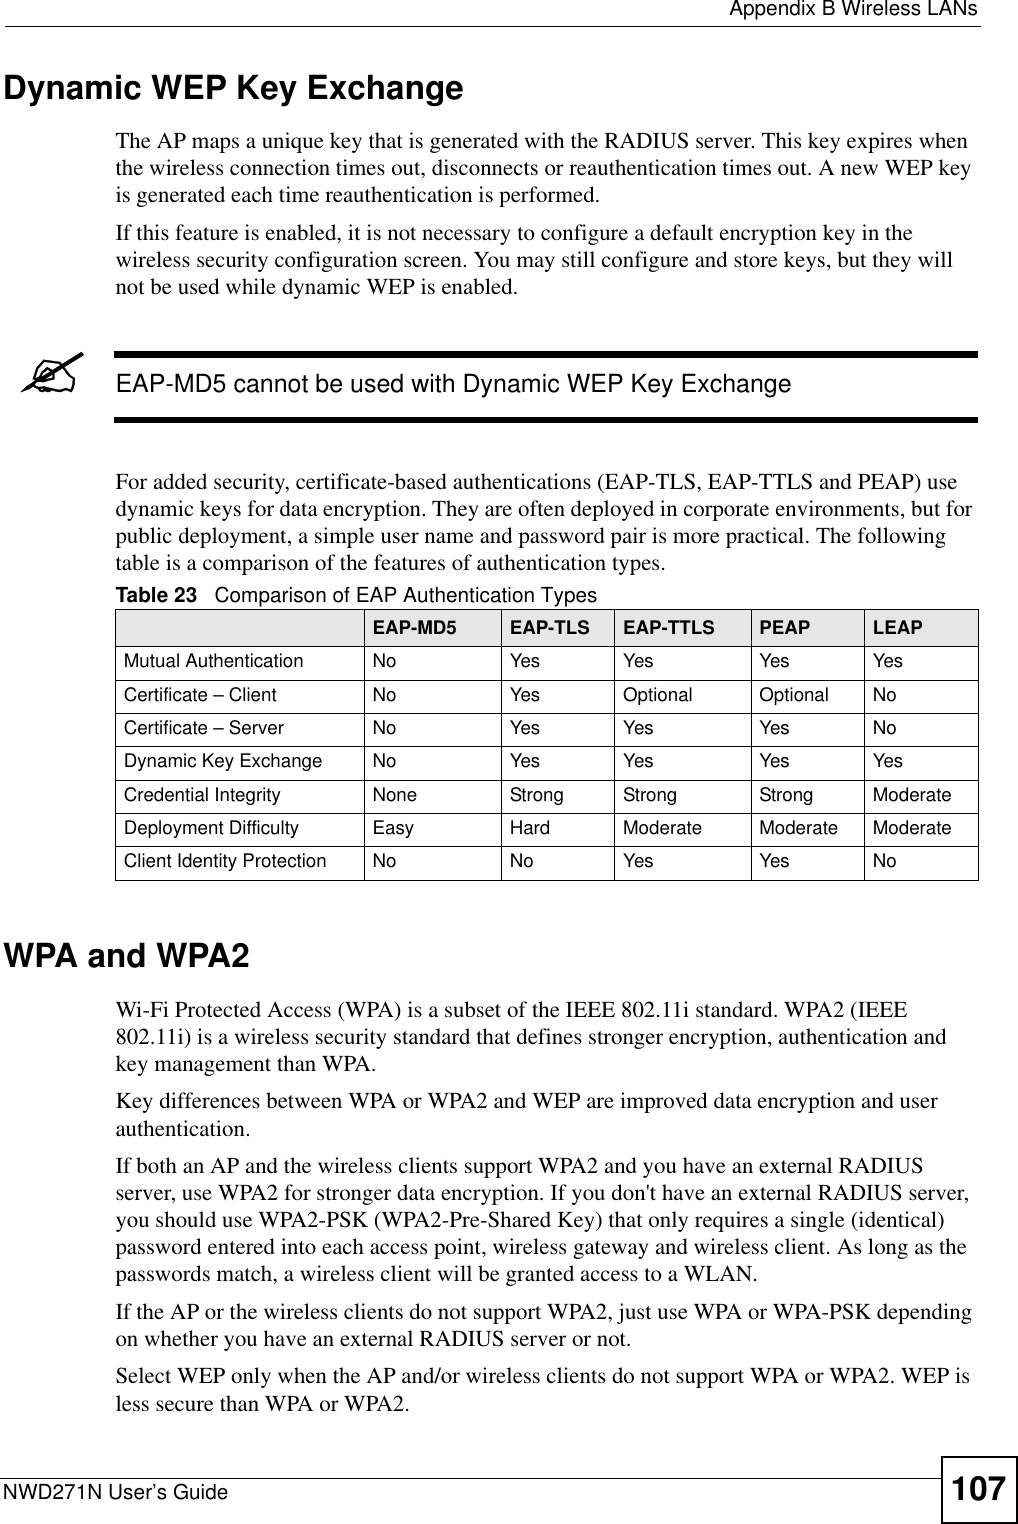  Appendix B Wireless LANsNWD271N User’s Guide 107Dynamic WEP Key ExchangeThe AP maps a unique key that is generated with the RADIUS server. This key expires when the wireless connection times out, disconnects or reauthentication times out. A new WEP key is generated each time reauthentication is performed.If this feature is enabled, it is not necessary to configure a default encryption key in the wireless security configuration screen. You may still configure and store keys, but they will not be used while dynamic WEP is enabled.&quot;EAP-MD5 cannot be used with Dynamic WEP Key ExchangeFor added security, certificate-based authentications (EAP-TLS, EAP-TTLS and PEAP) use dynamic keys for data encryption. They are often deployed in corporate environments, but for public deployment, a simple user name and password pair is more practical. The following table is a comparison of the features of authentication types.WPA and WPA2Wi-Fi Protected Access (WPA) is a subset of the IEEE 802.11i standard. WPA2 (IEEE 802.11i) is a wireless security standard that defines stronger encryption, authentication and key management than WPA. Key differences between WPA or WPA2 and WEP are improved data encryption and user authentication.If both an AP and the wireless clients support WPA2 and you have an external RADIUS server, use WPA2 for stronger data encryption. If you don&apos;t have an external RADIUS server, you should use WPA2-PSK (WPA2-Pre-Shared Key) that only requires a single (identical) password entered into each access point, wireless gateway and wireless client. As long as the passwords match, a wireless client will be granted access to a WLAN. If the AP or the wireless clients do not support WPA2, just use WPA or WPA-PSK depending on whether you have an external RADIUS server or not.Select WEP only when the AP and/or wireless clients do not support WPA or WPA2. WEP is less secure than WPA or WPA2.Table 23   Comparison of EAP Authentication TypesEAP-MD5 EAP-TLS EAP-TTLS PEAP LEAPMutual Authentication No Yes Yes Yes YesCertificate – Client No Yes Optional Optional NoCertificate – Server No Yes Yes Yes NoDynamic Key Exchange No Yes Yes Yes YesCredential Integrity None Strong Strong Strong ModerateDeployment Difficulty Easy Hard Moderate Moderate ModerateClient Identity Protection No No Yes Yes No